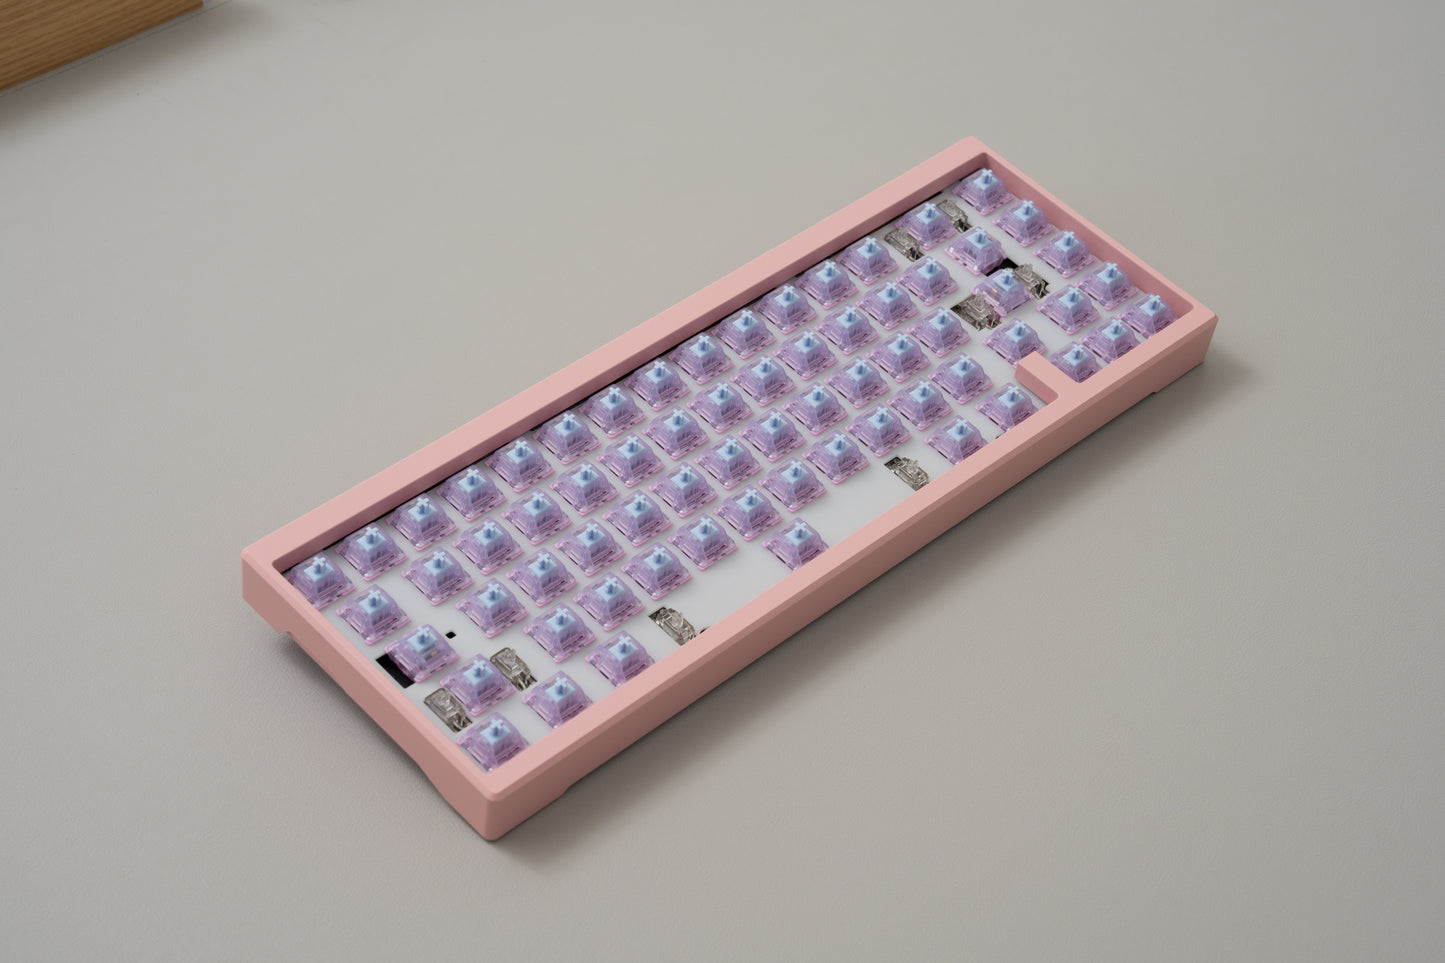 [Group-Buy] Knight 313 - Special Colors Case